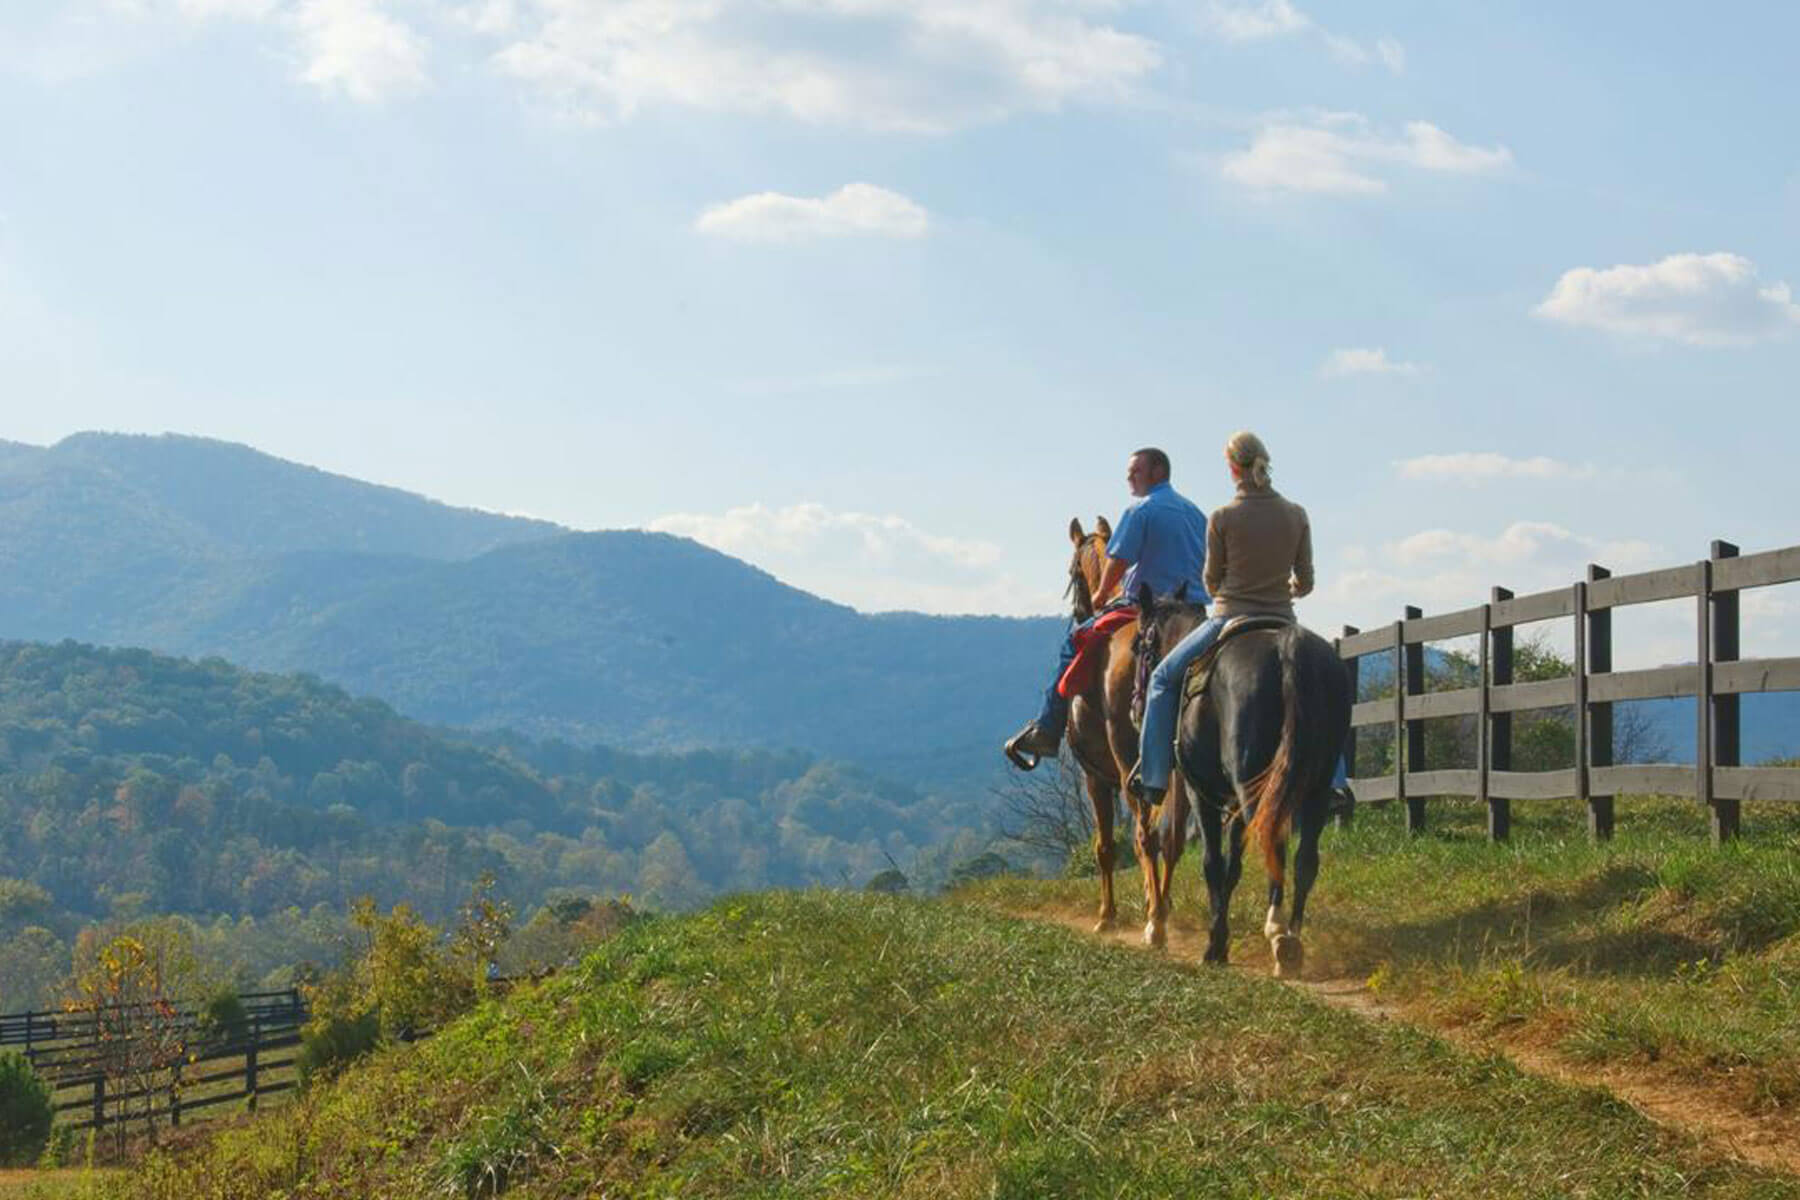 brasstown valley stables horseback riding mountains